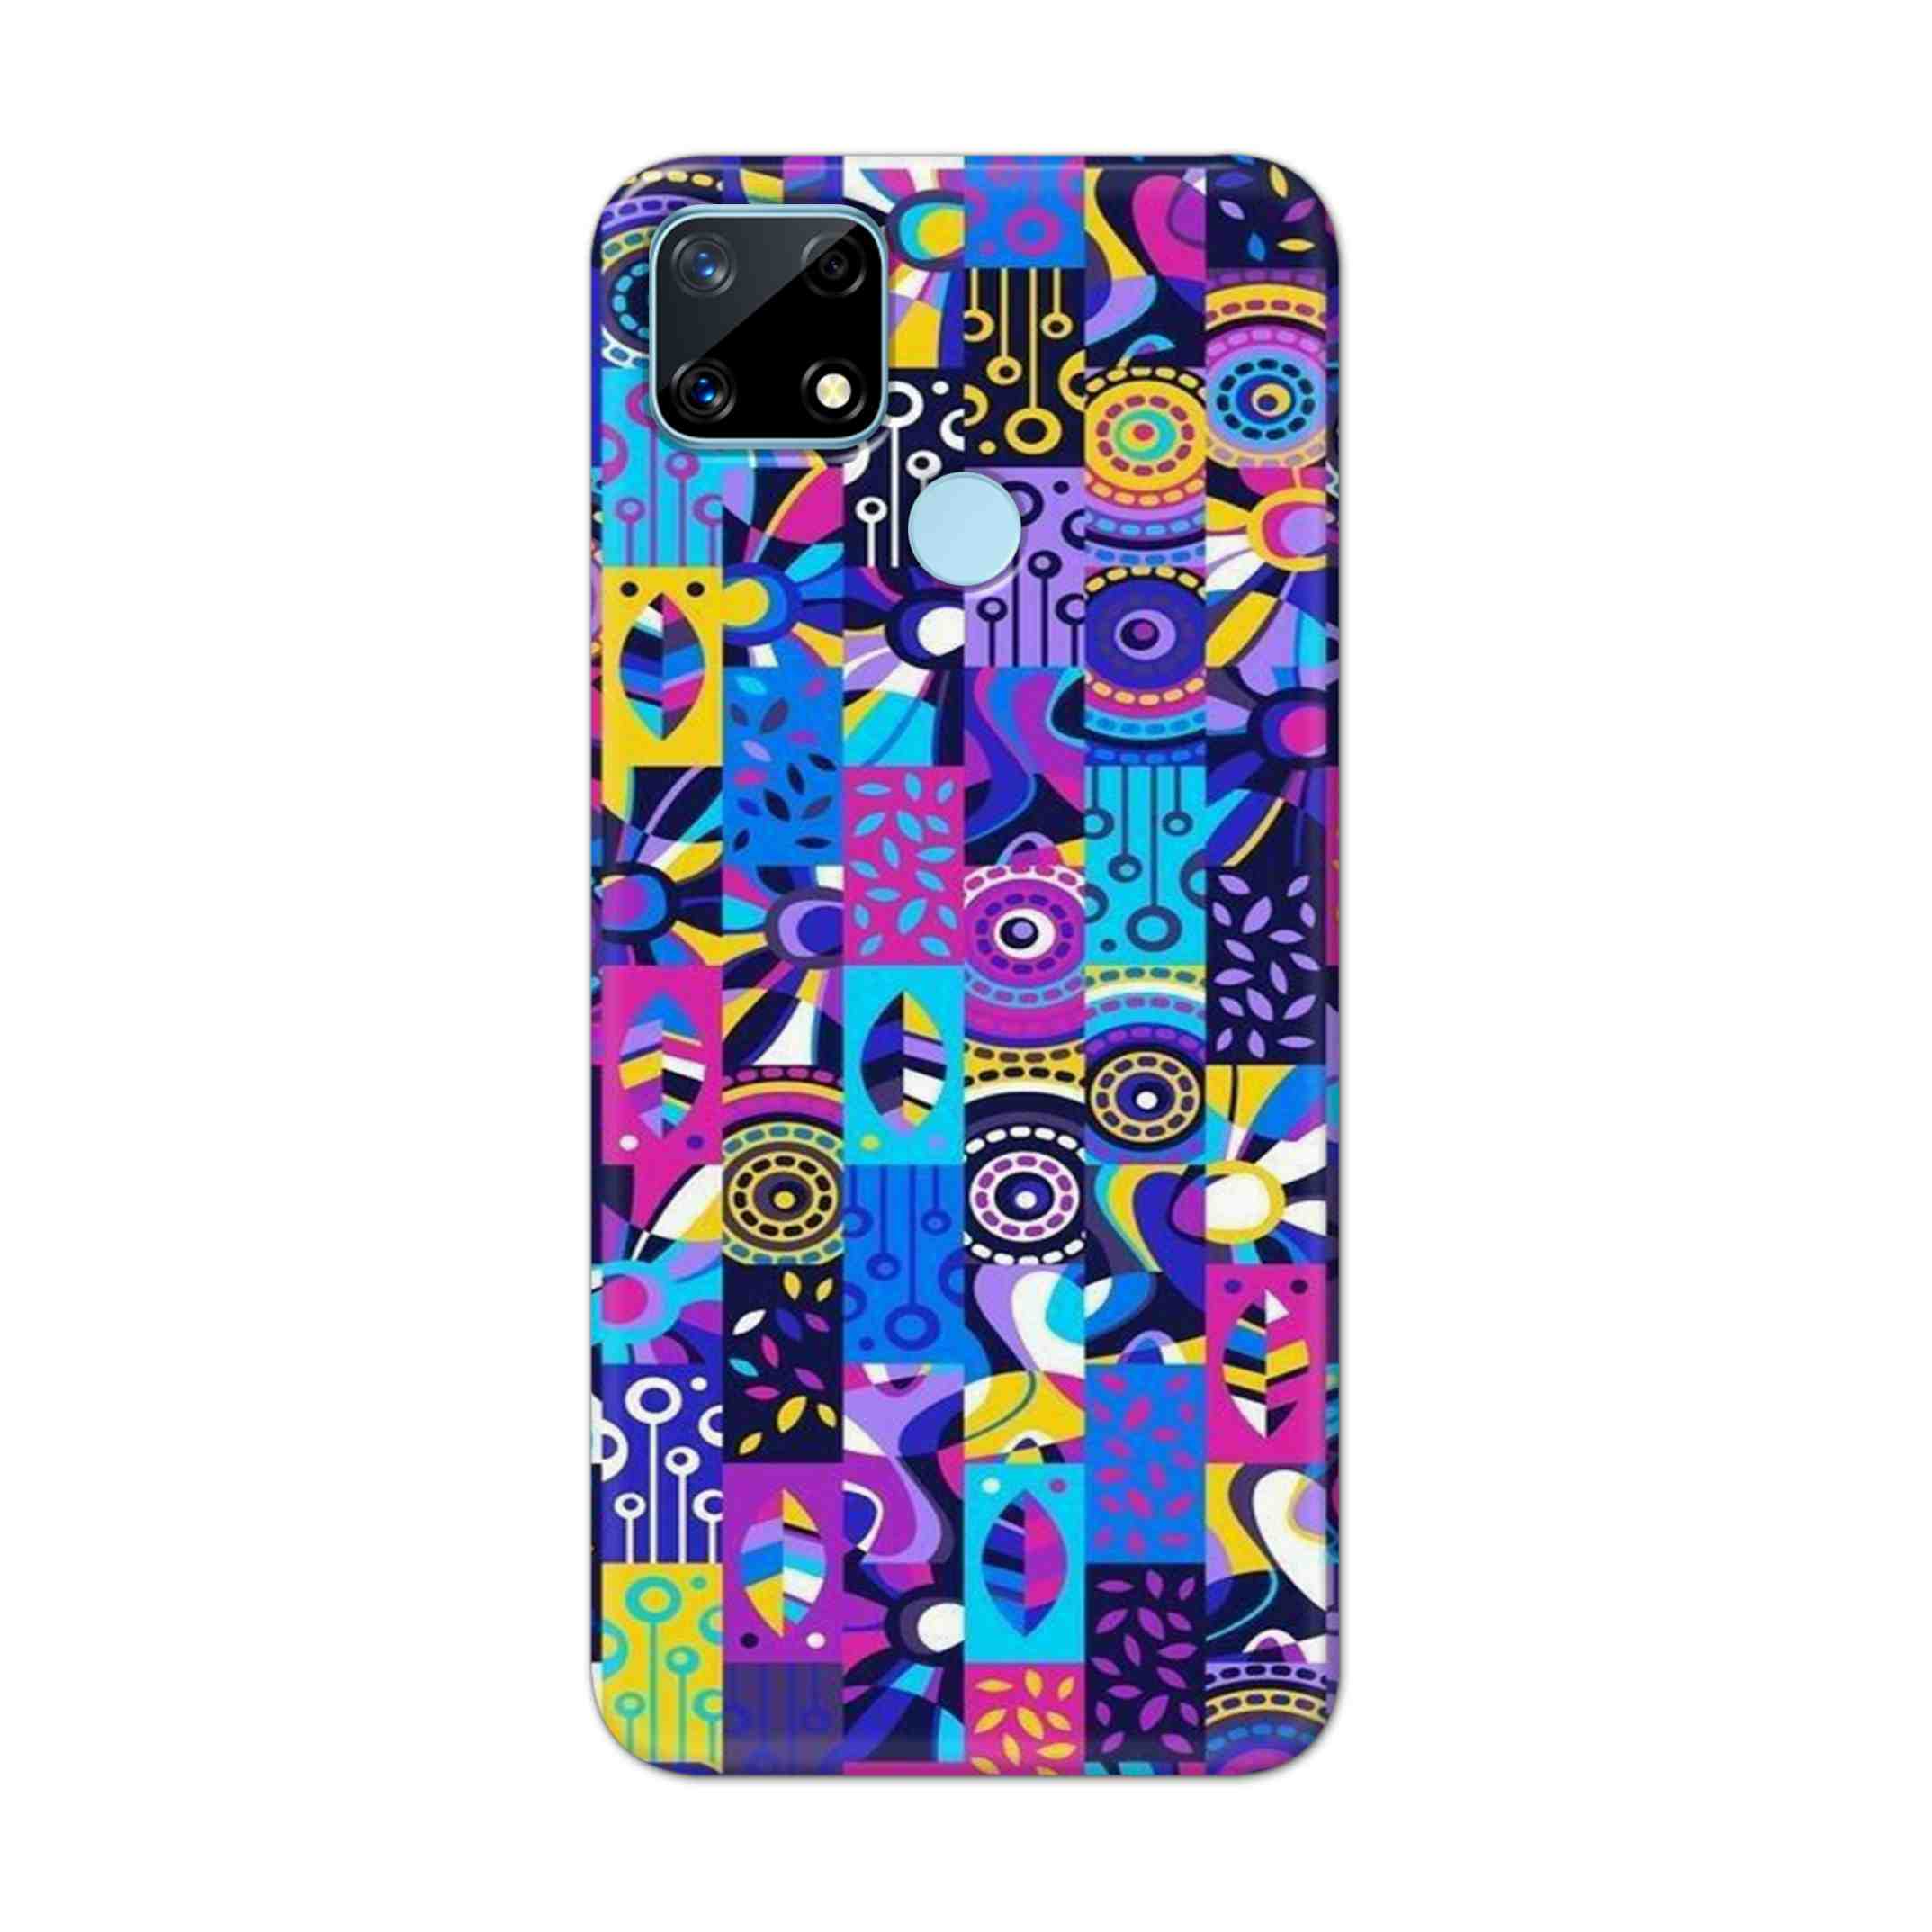 Buy Rainbow Art Hard Back Mobile Phone Case Cover For Realme Narzo 20 Online